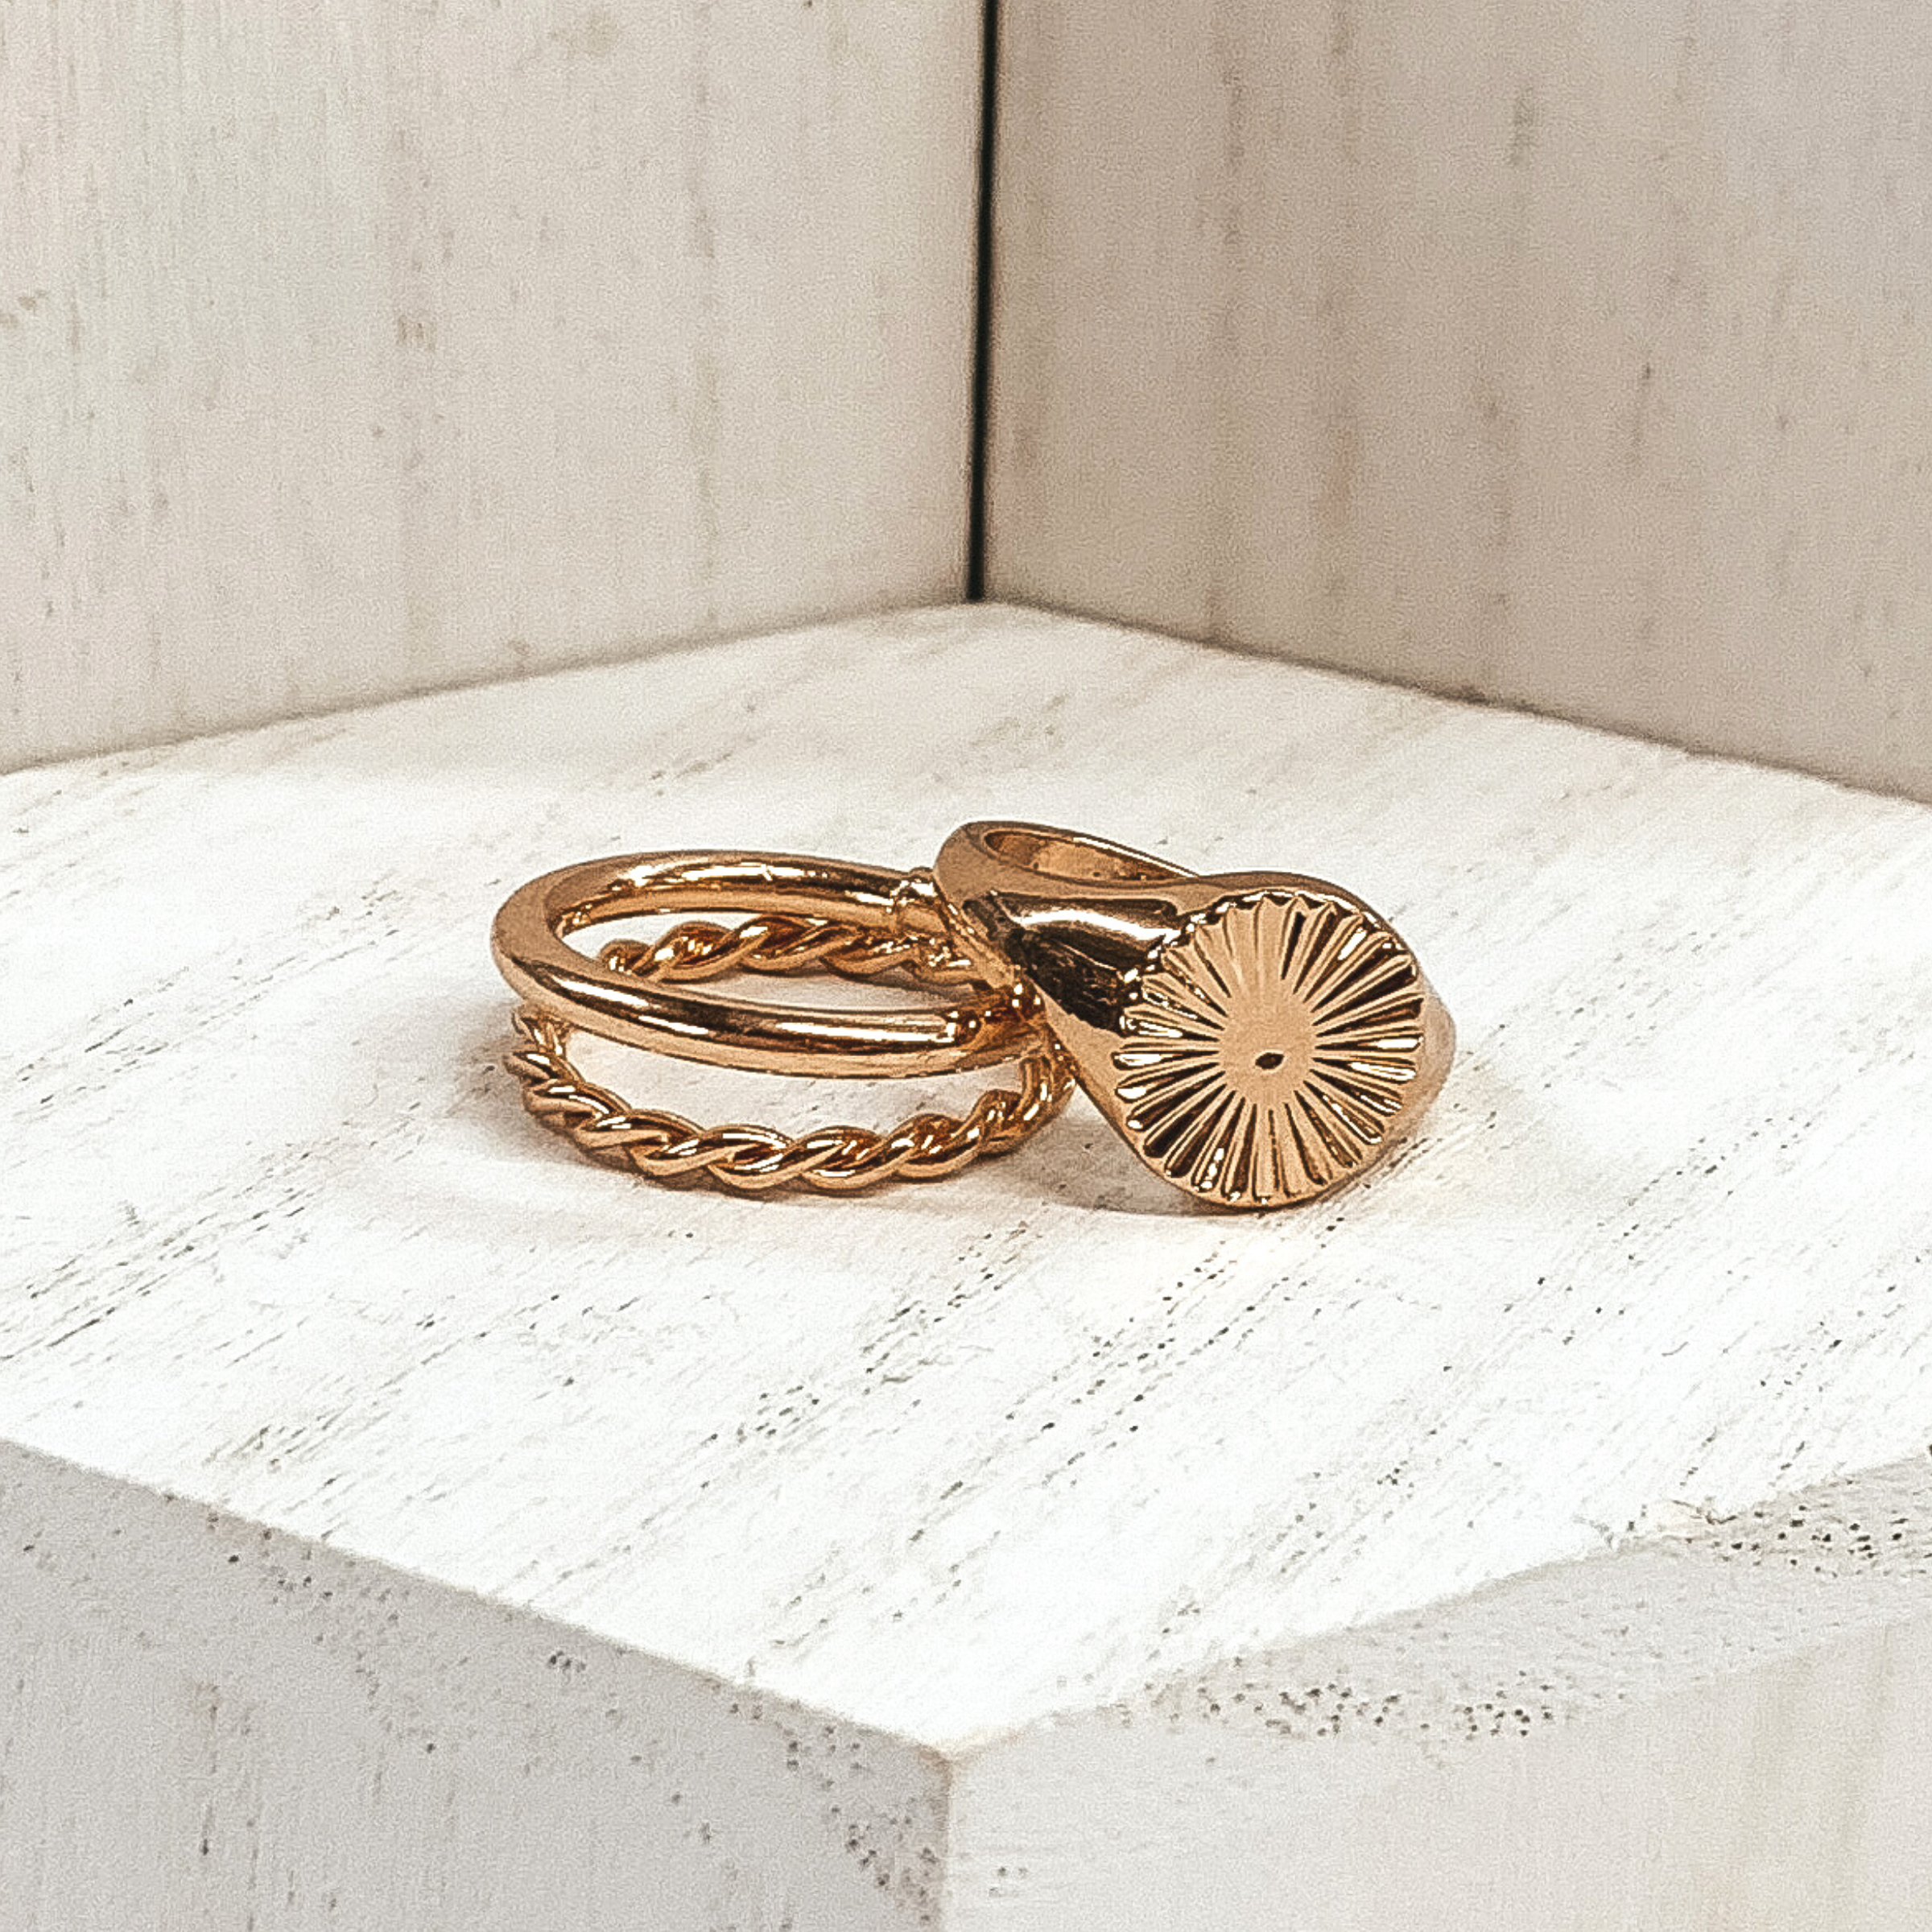 Both rings are gold in color. The double ring has one plain band and one twisted band. The ring that is leaning on it has a circle pendant with a starburst design on it. These rings are pictured on a white background.